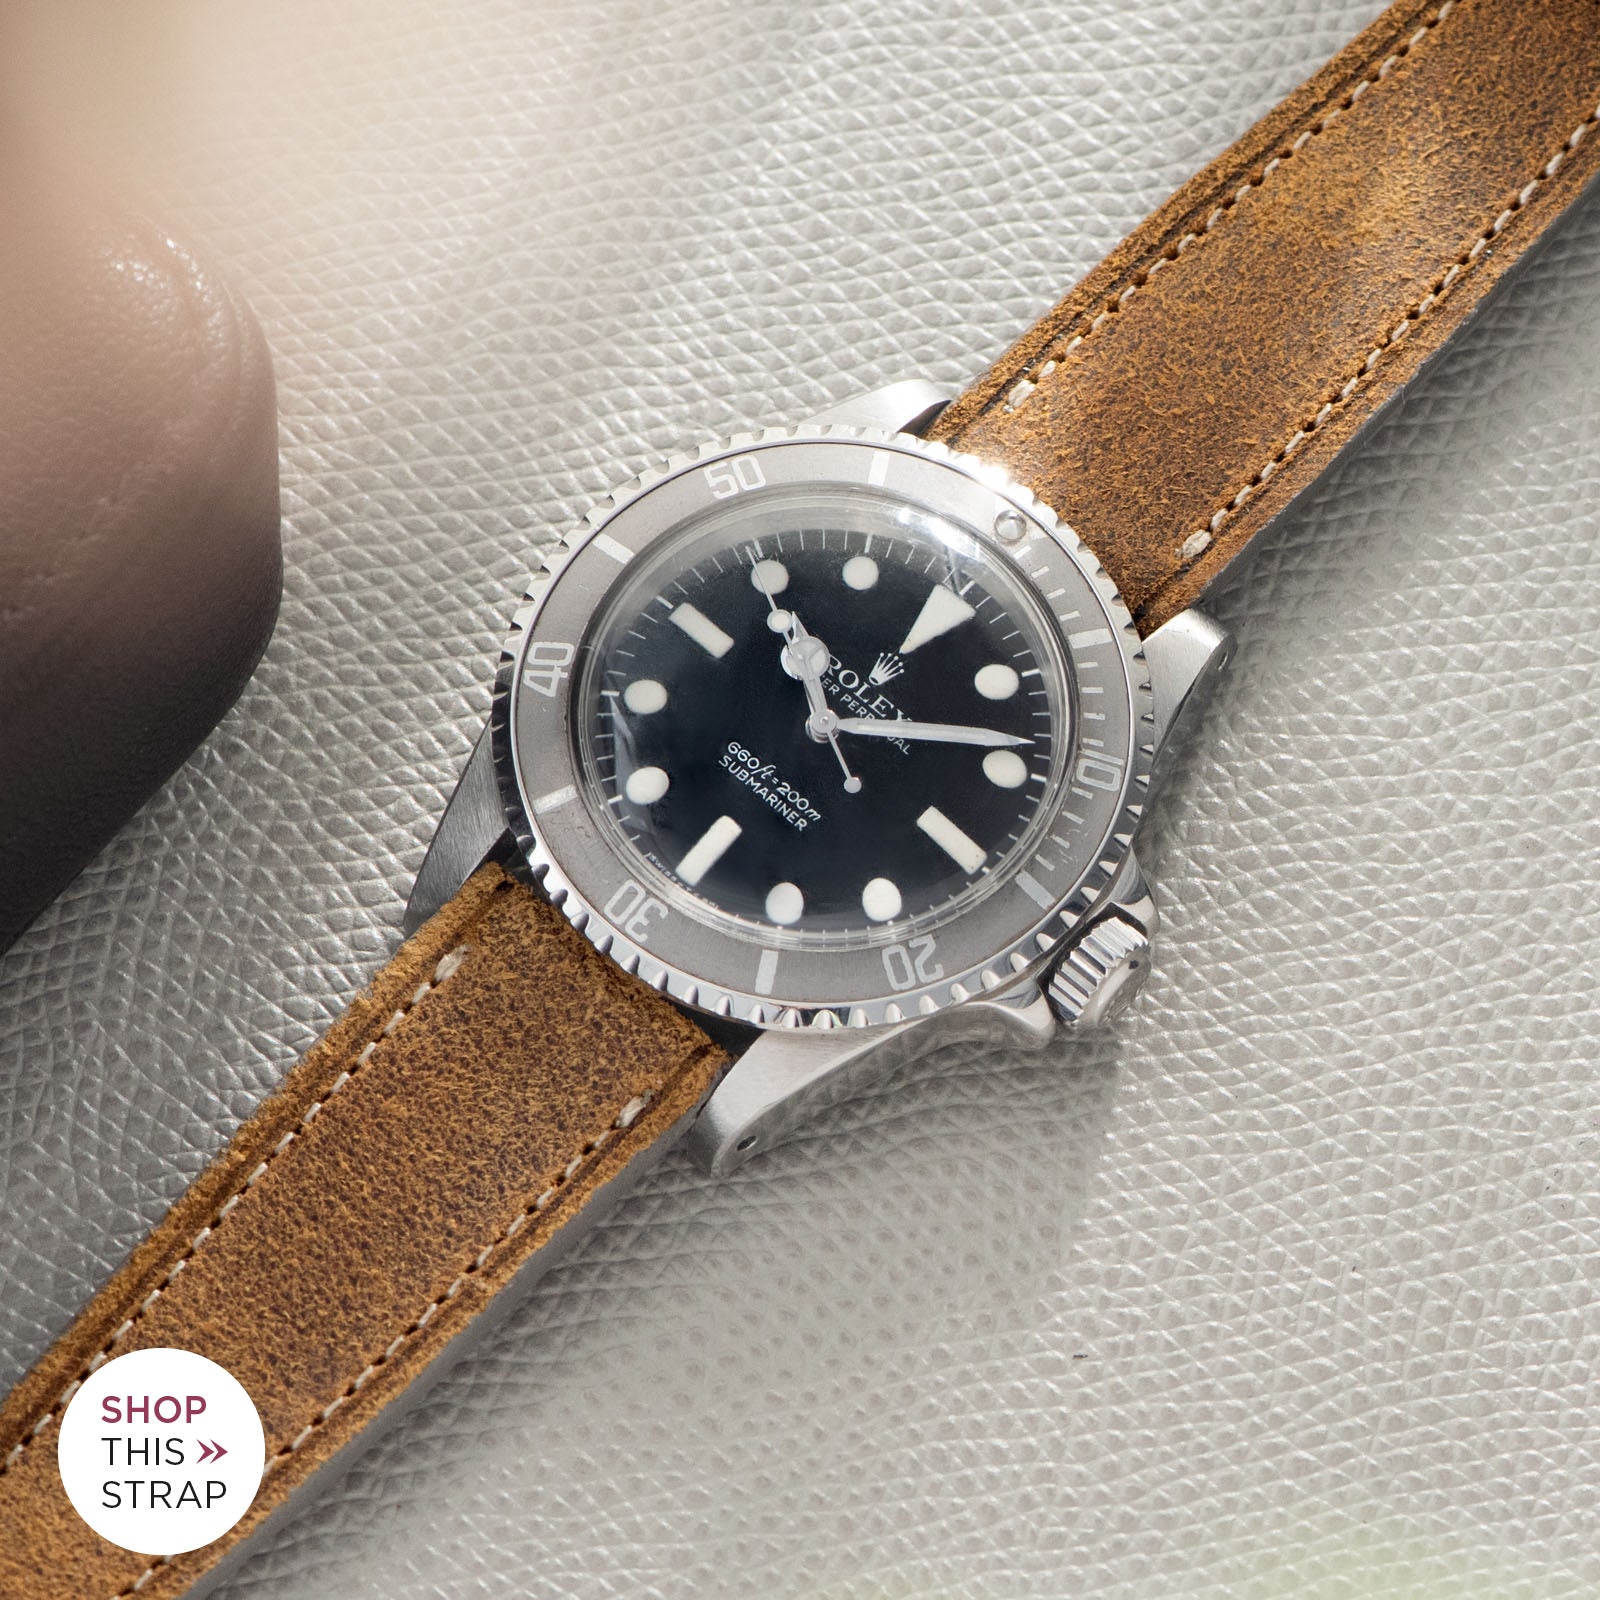 Bulang and Sons_Strap Guide_The Rolex 5513 Faded Maxi Submariner_Le Marais Brown Leather Watch Strap